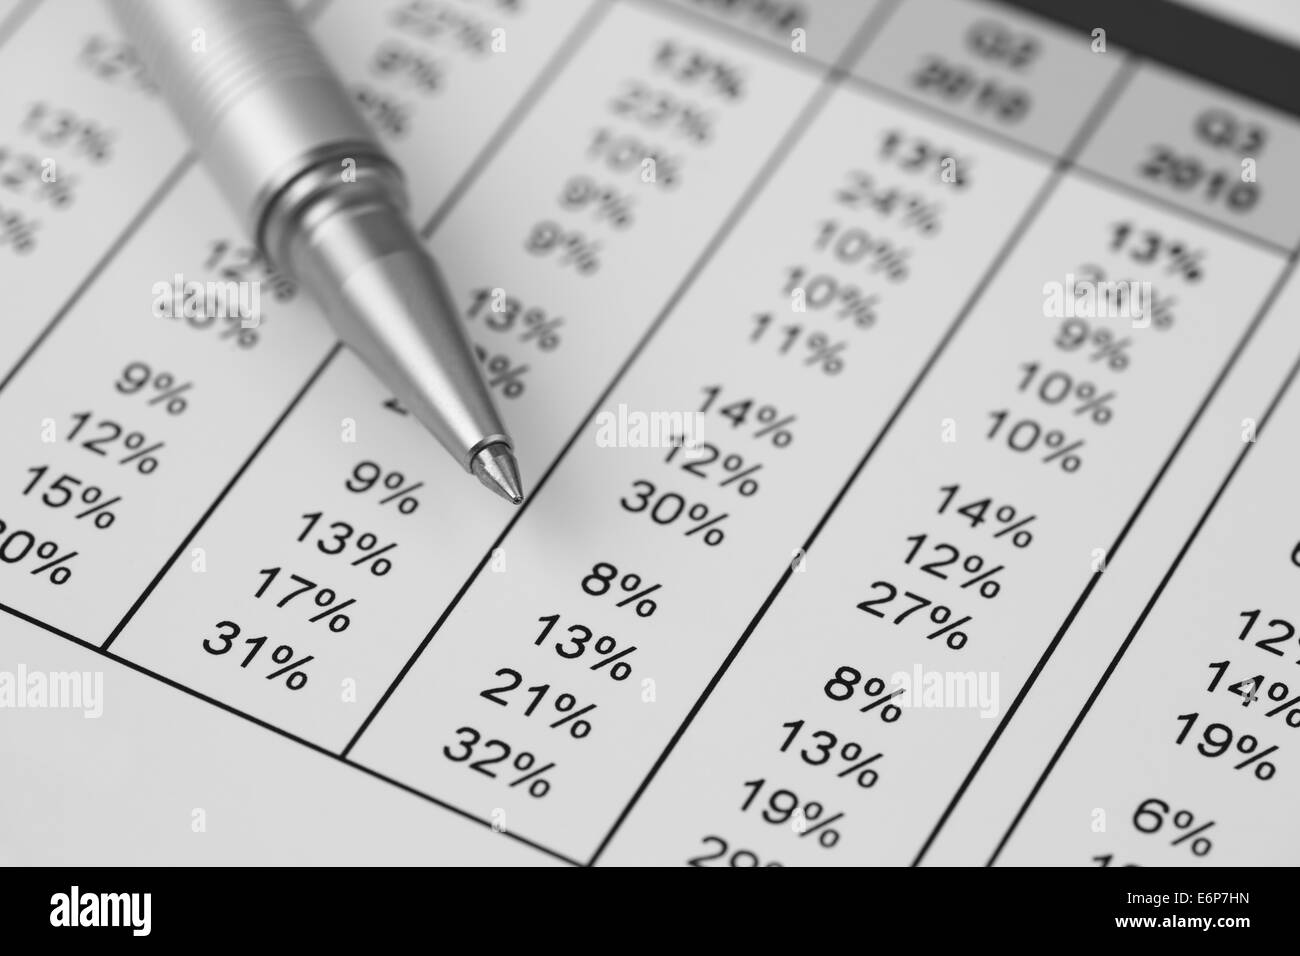 Ballpoint pen on financial statements. Black and white, Stock Photo